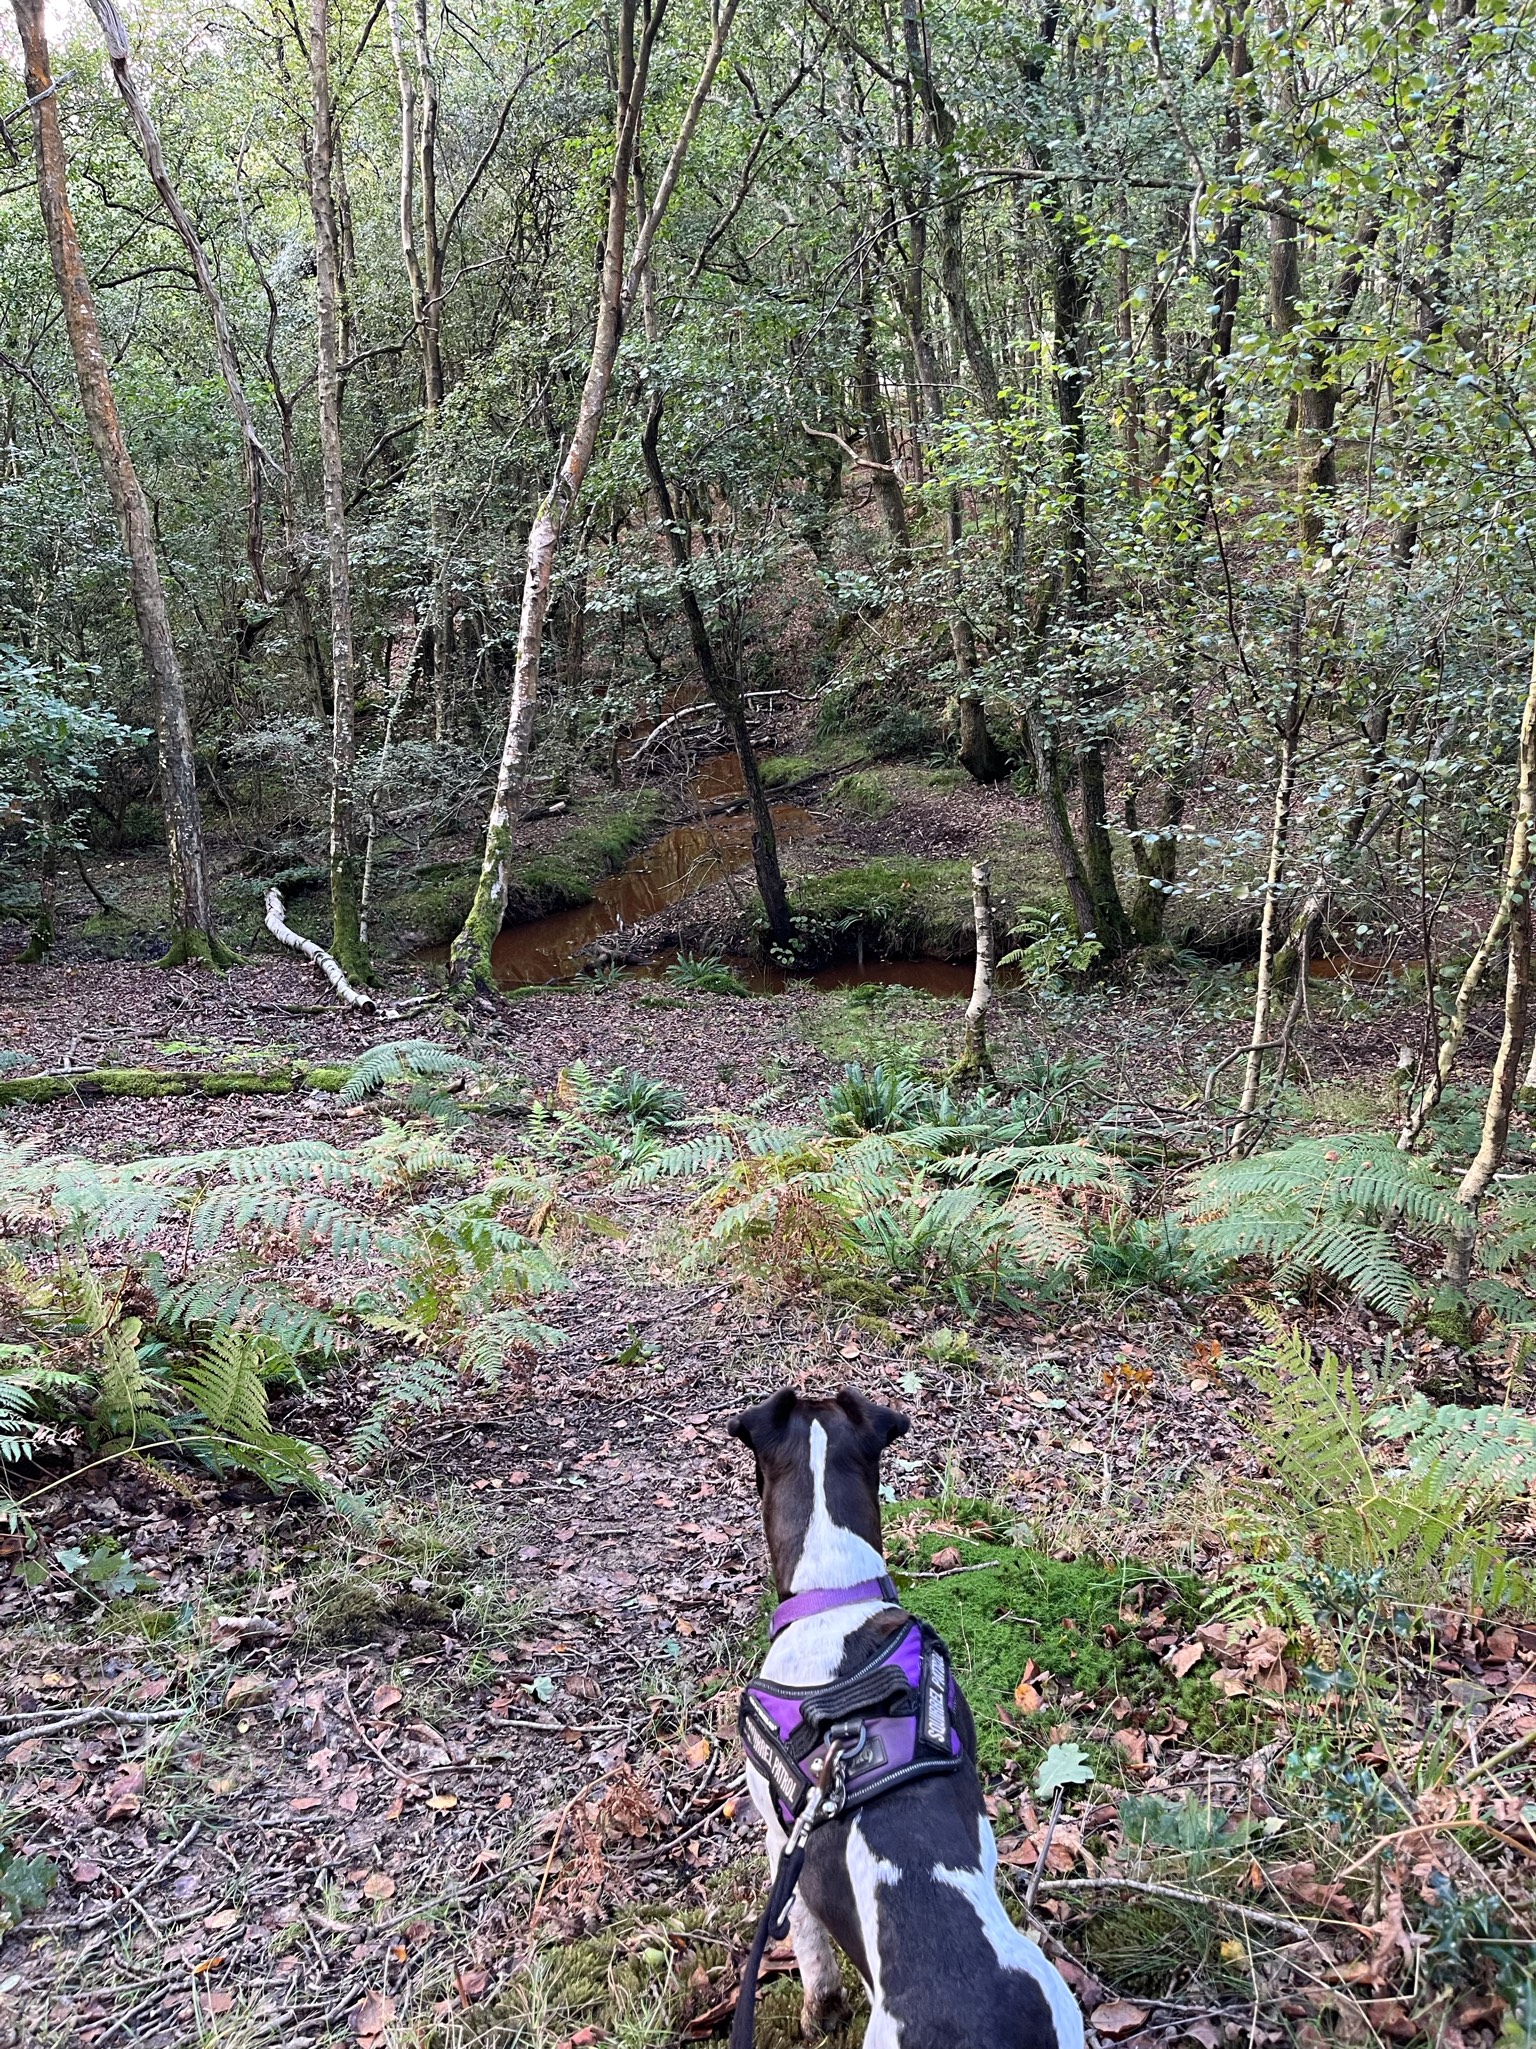 My first trip to Ashdown Forest